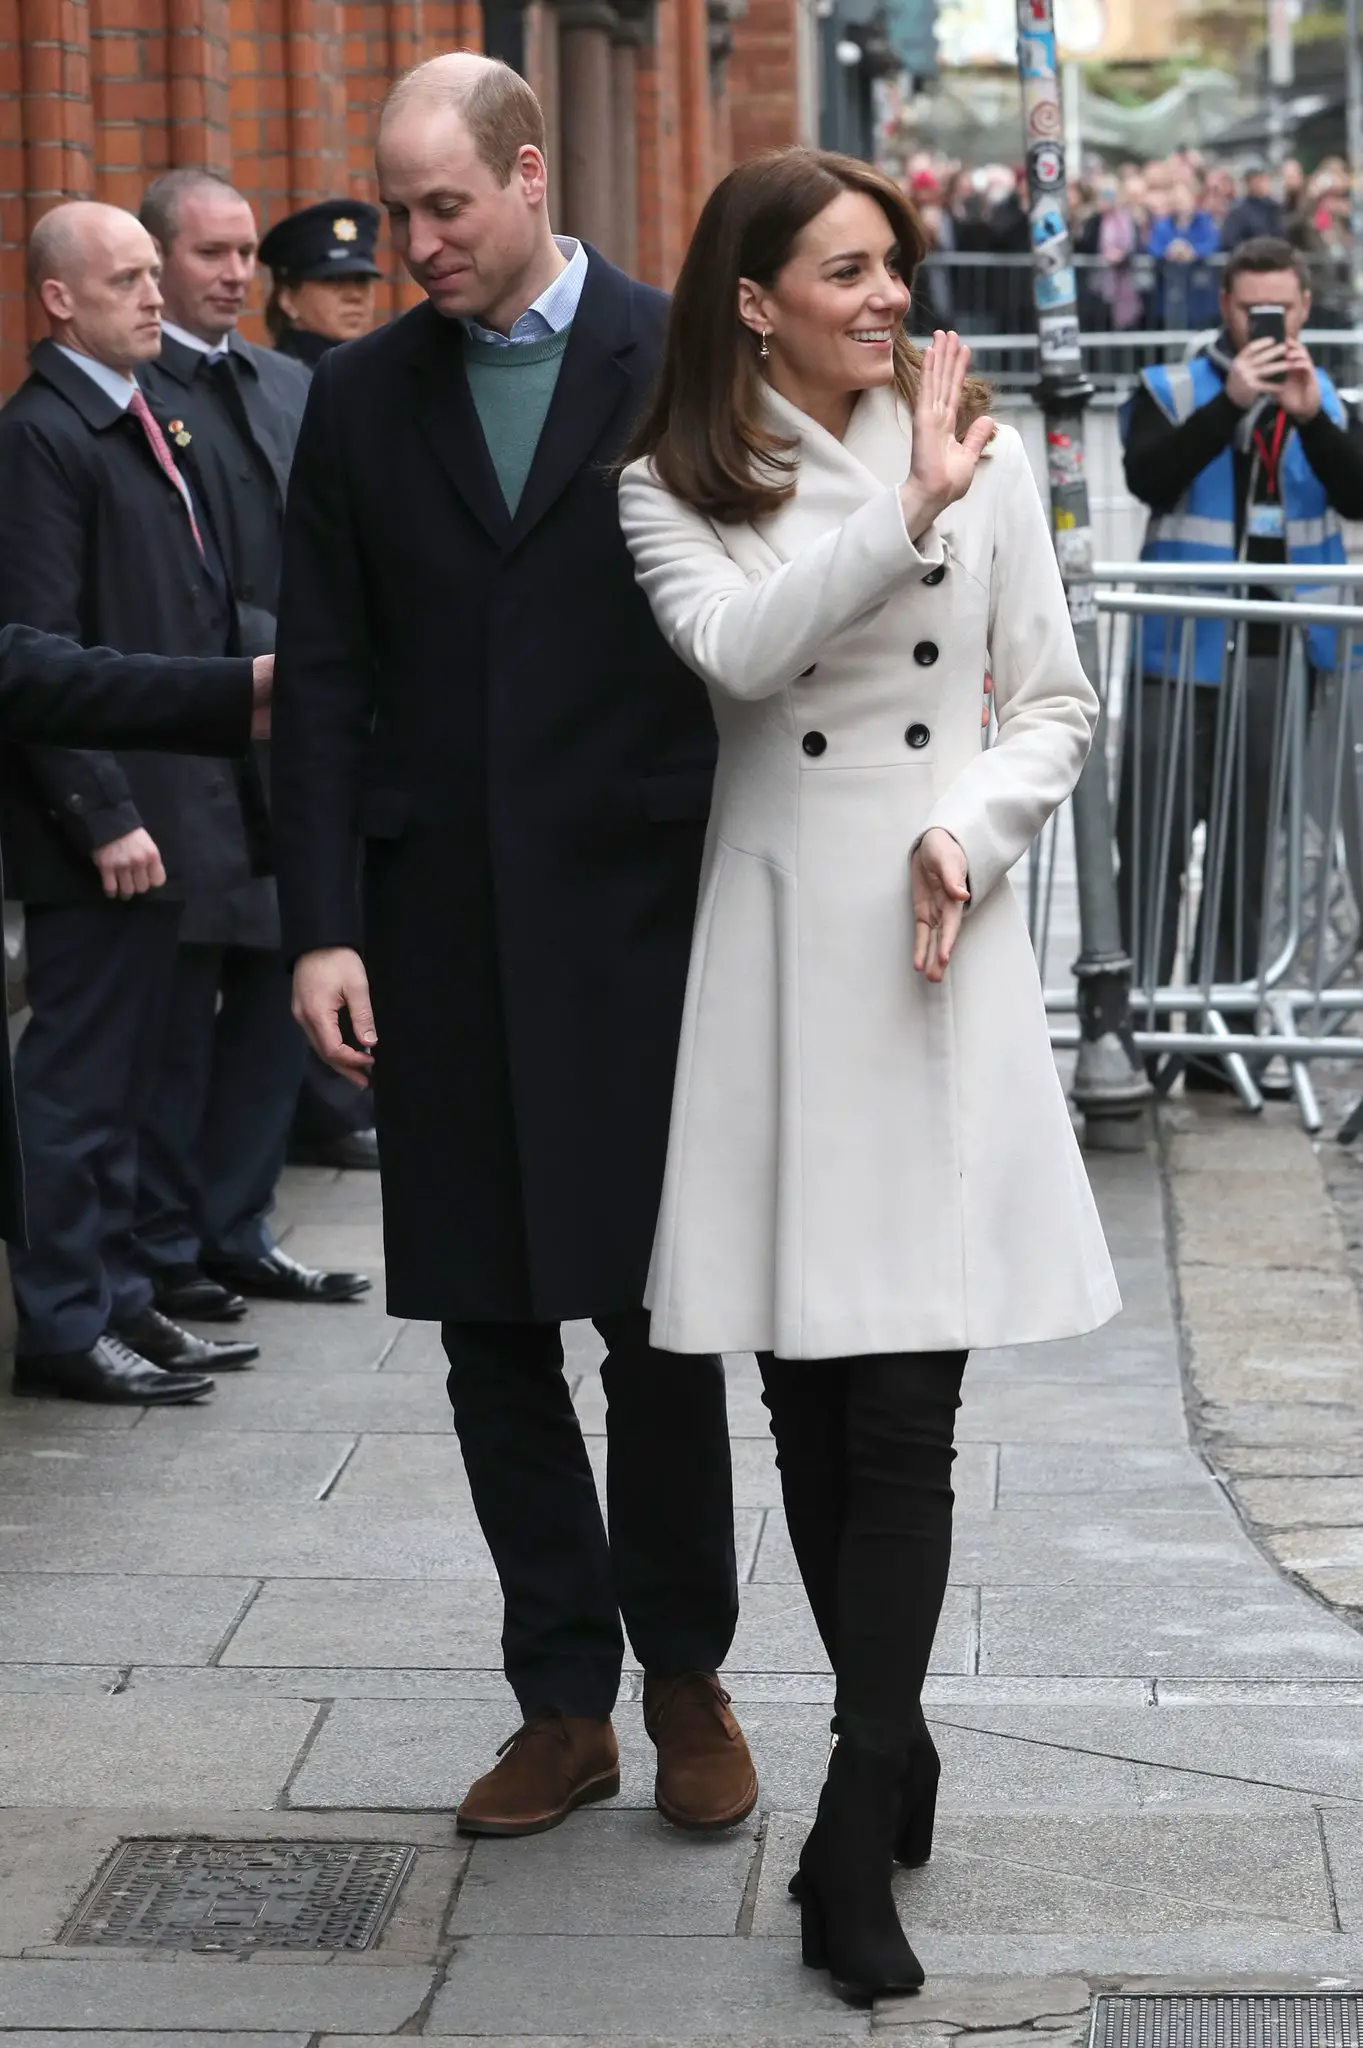 Duke and Duchess of Cambridge visited Jigsaw and Extern in Dublin on day 2 of Ireland